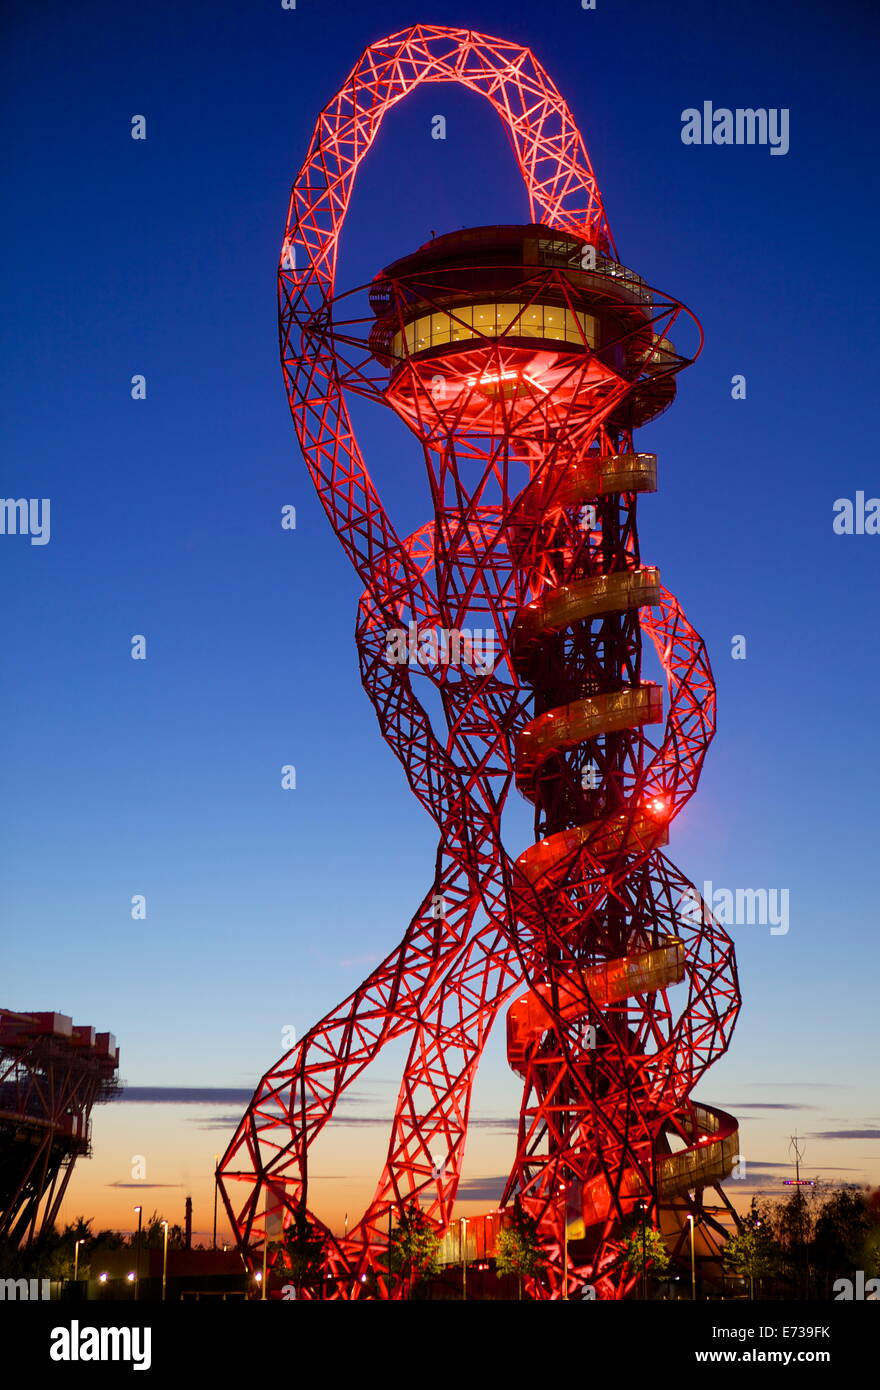 Orbit tower at twilight by Arcelor Mittal in the 2012 London Olympic Park, Stratford, London, England, United Kingdom, Europe Stock Photo